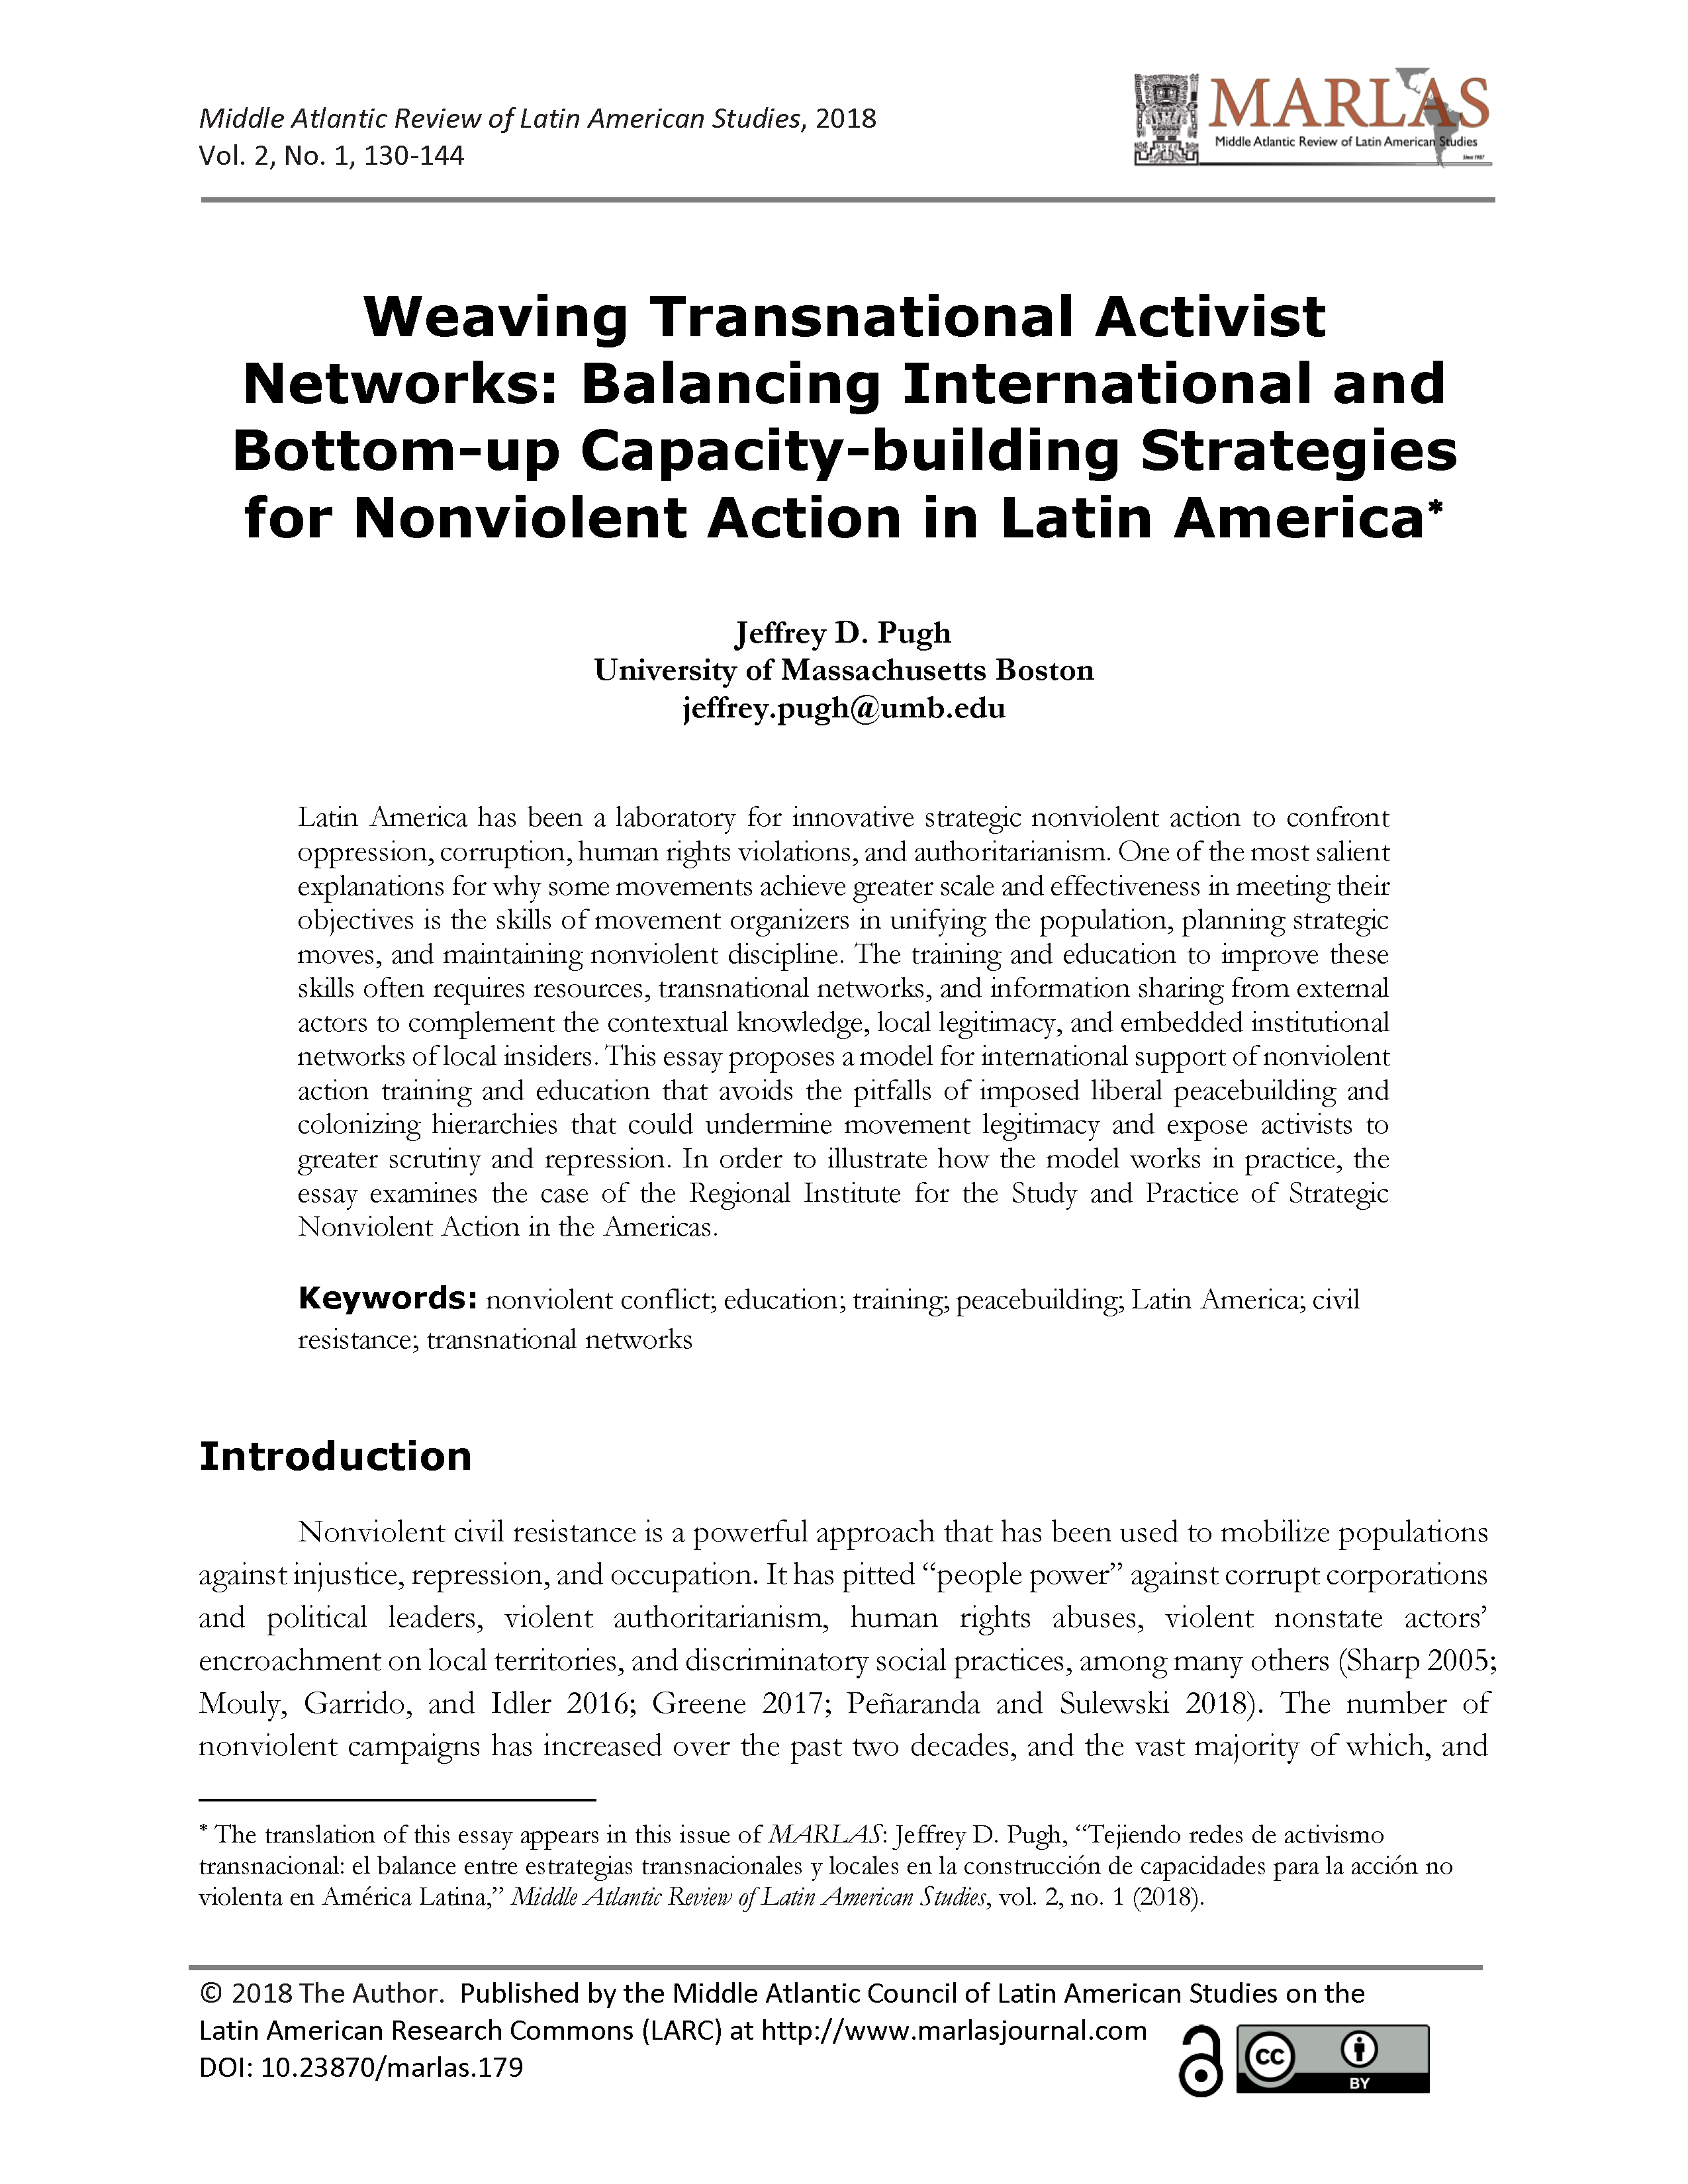 Weaving Transnational Activist Networks: Balancing International and Bottom-up Capacity-building Strategies for Nonviolent Action in Latin America